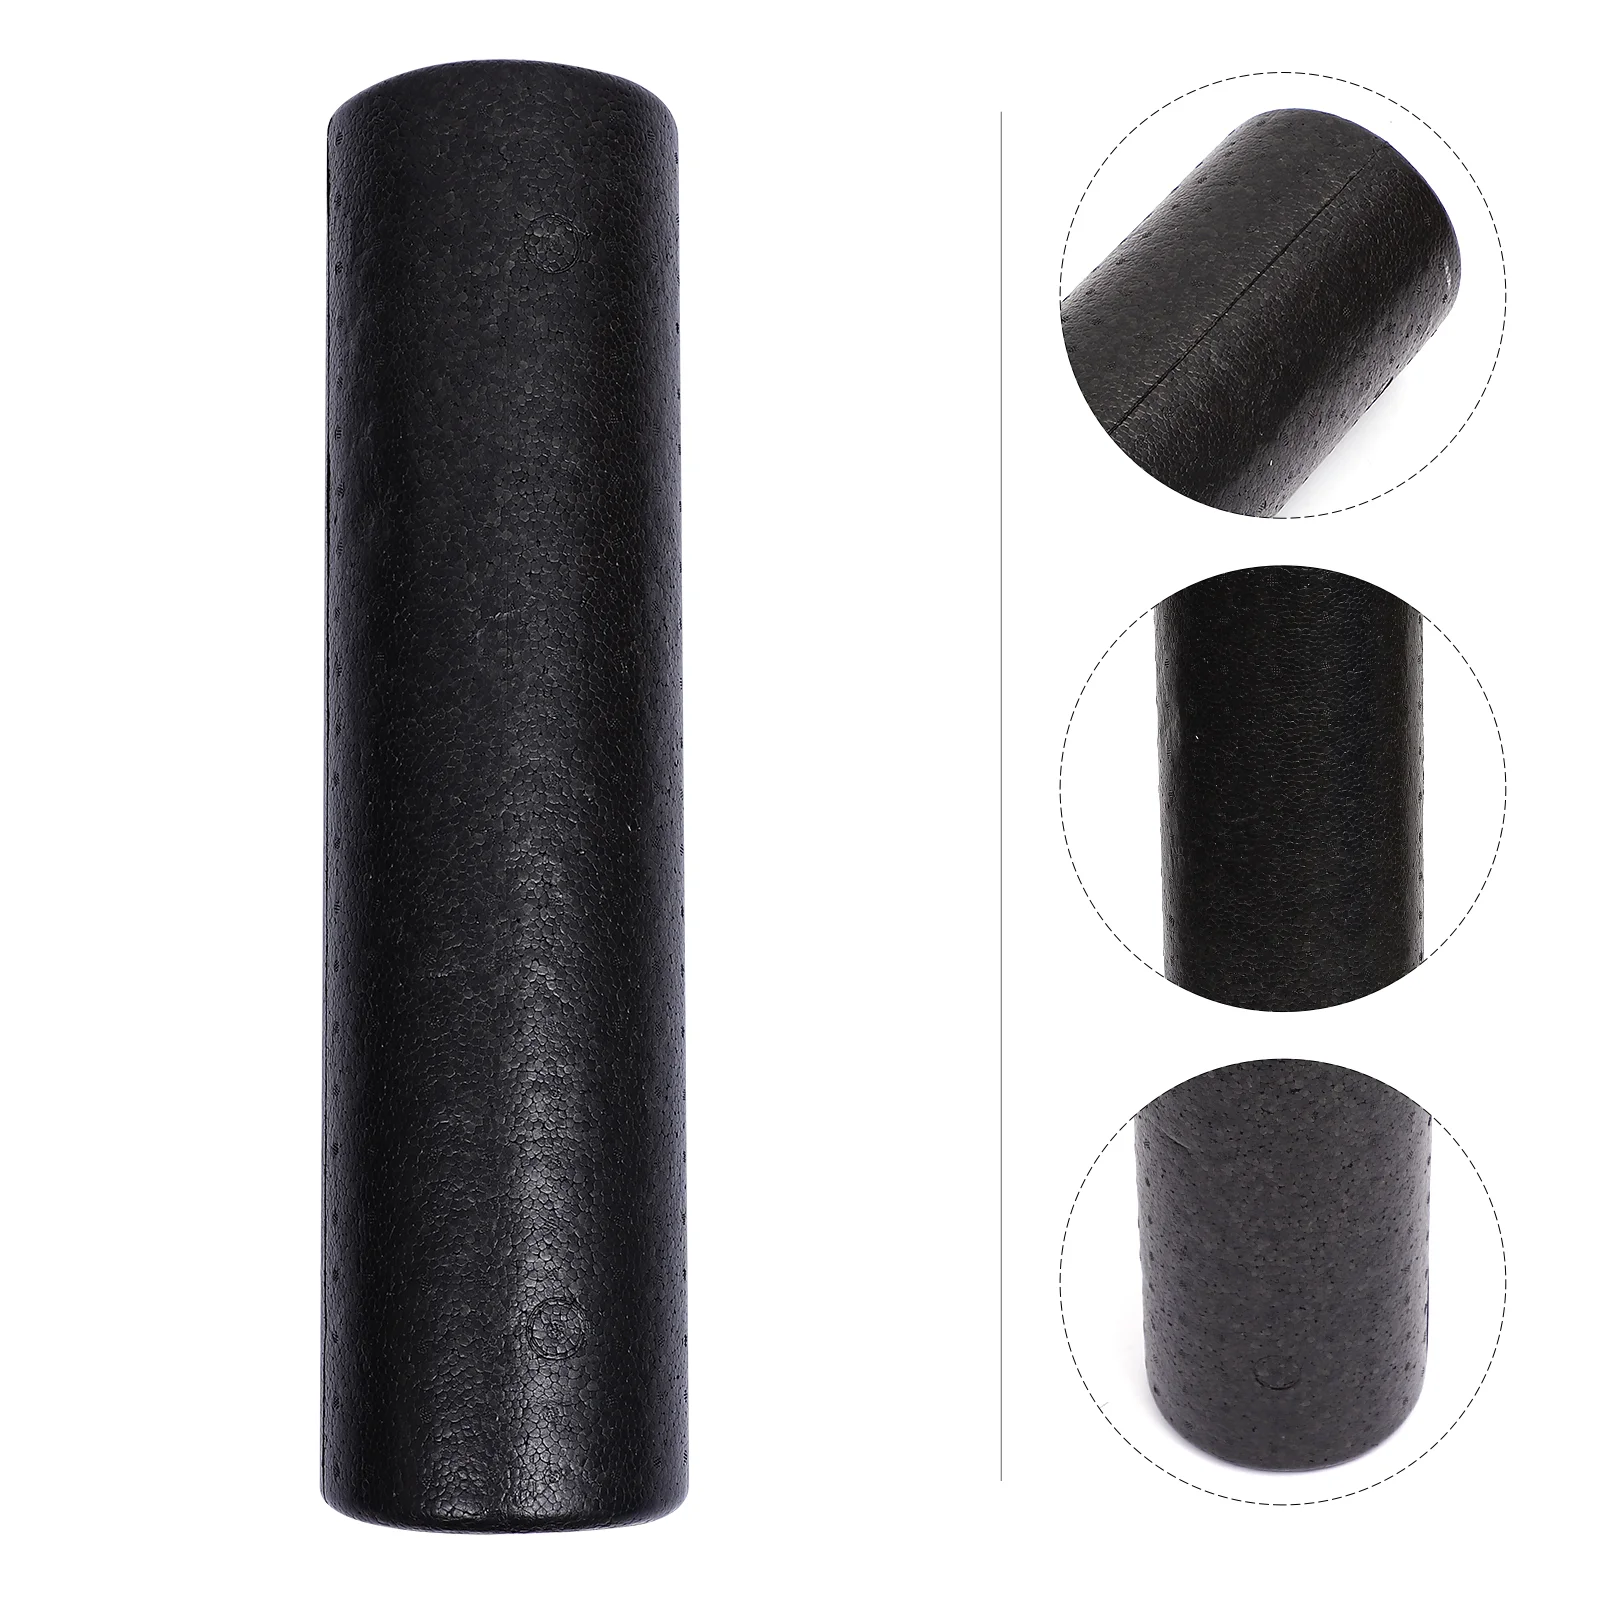 

Roller Foam Yoga Fitness Rollers High Density Exercise Accessories Physical Set Muscle Equipment Oam Stick Roll Neck Tissue Deep